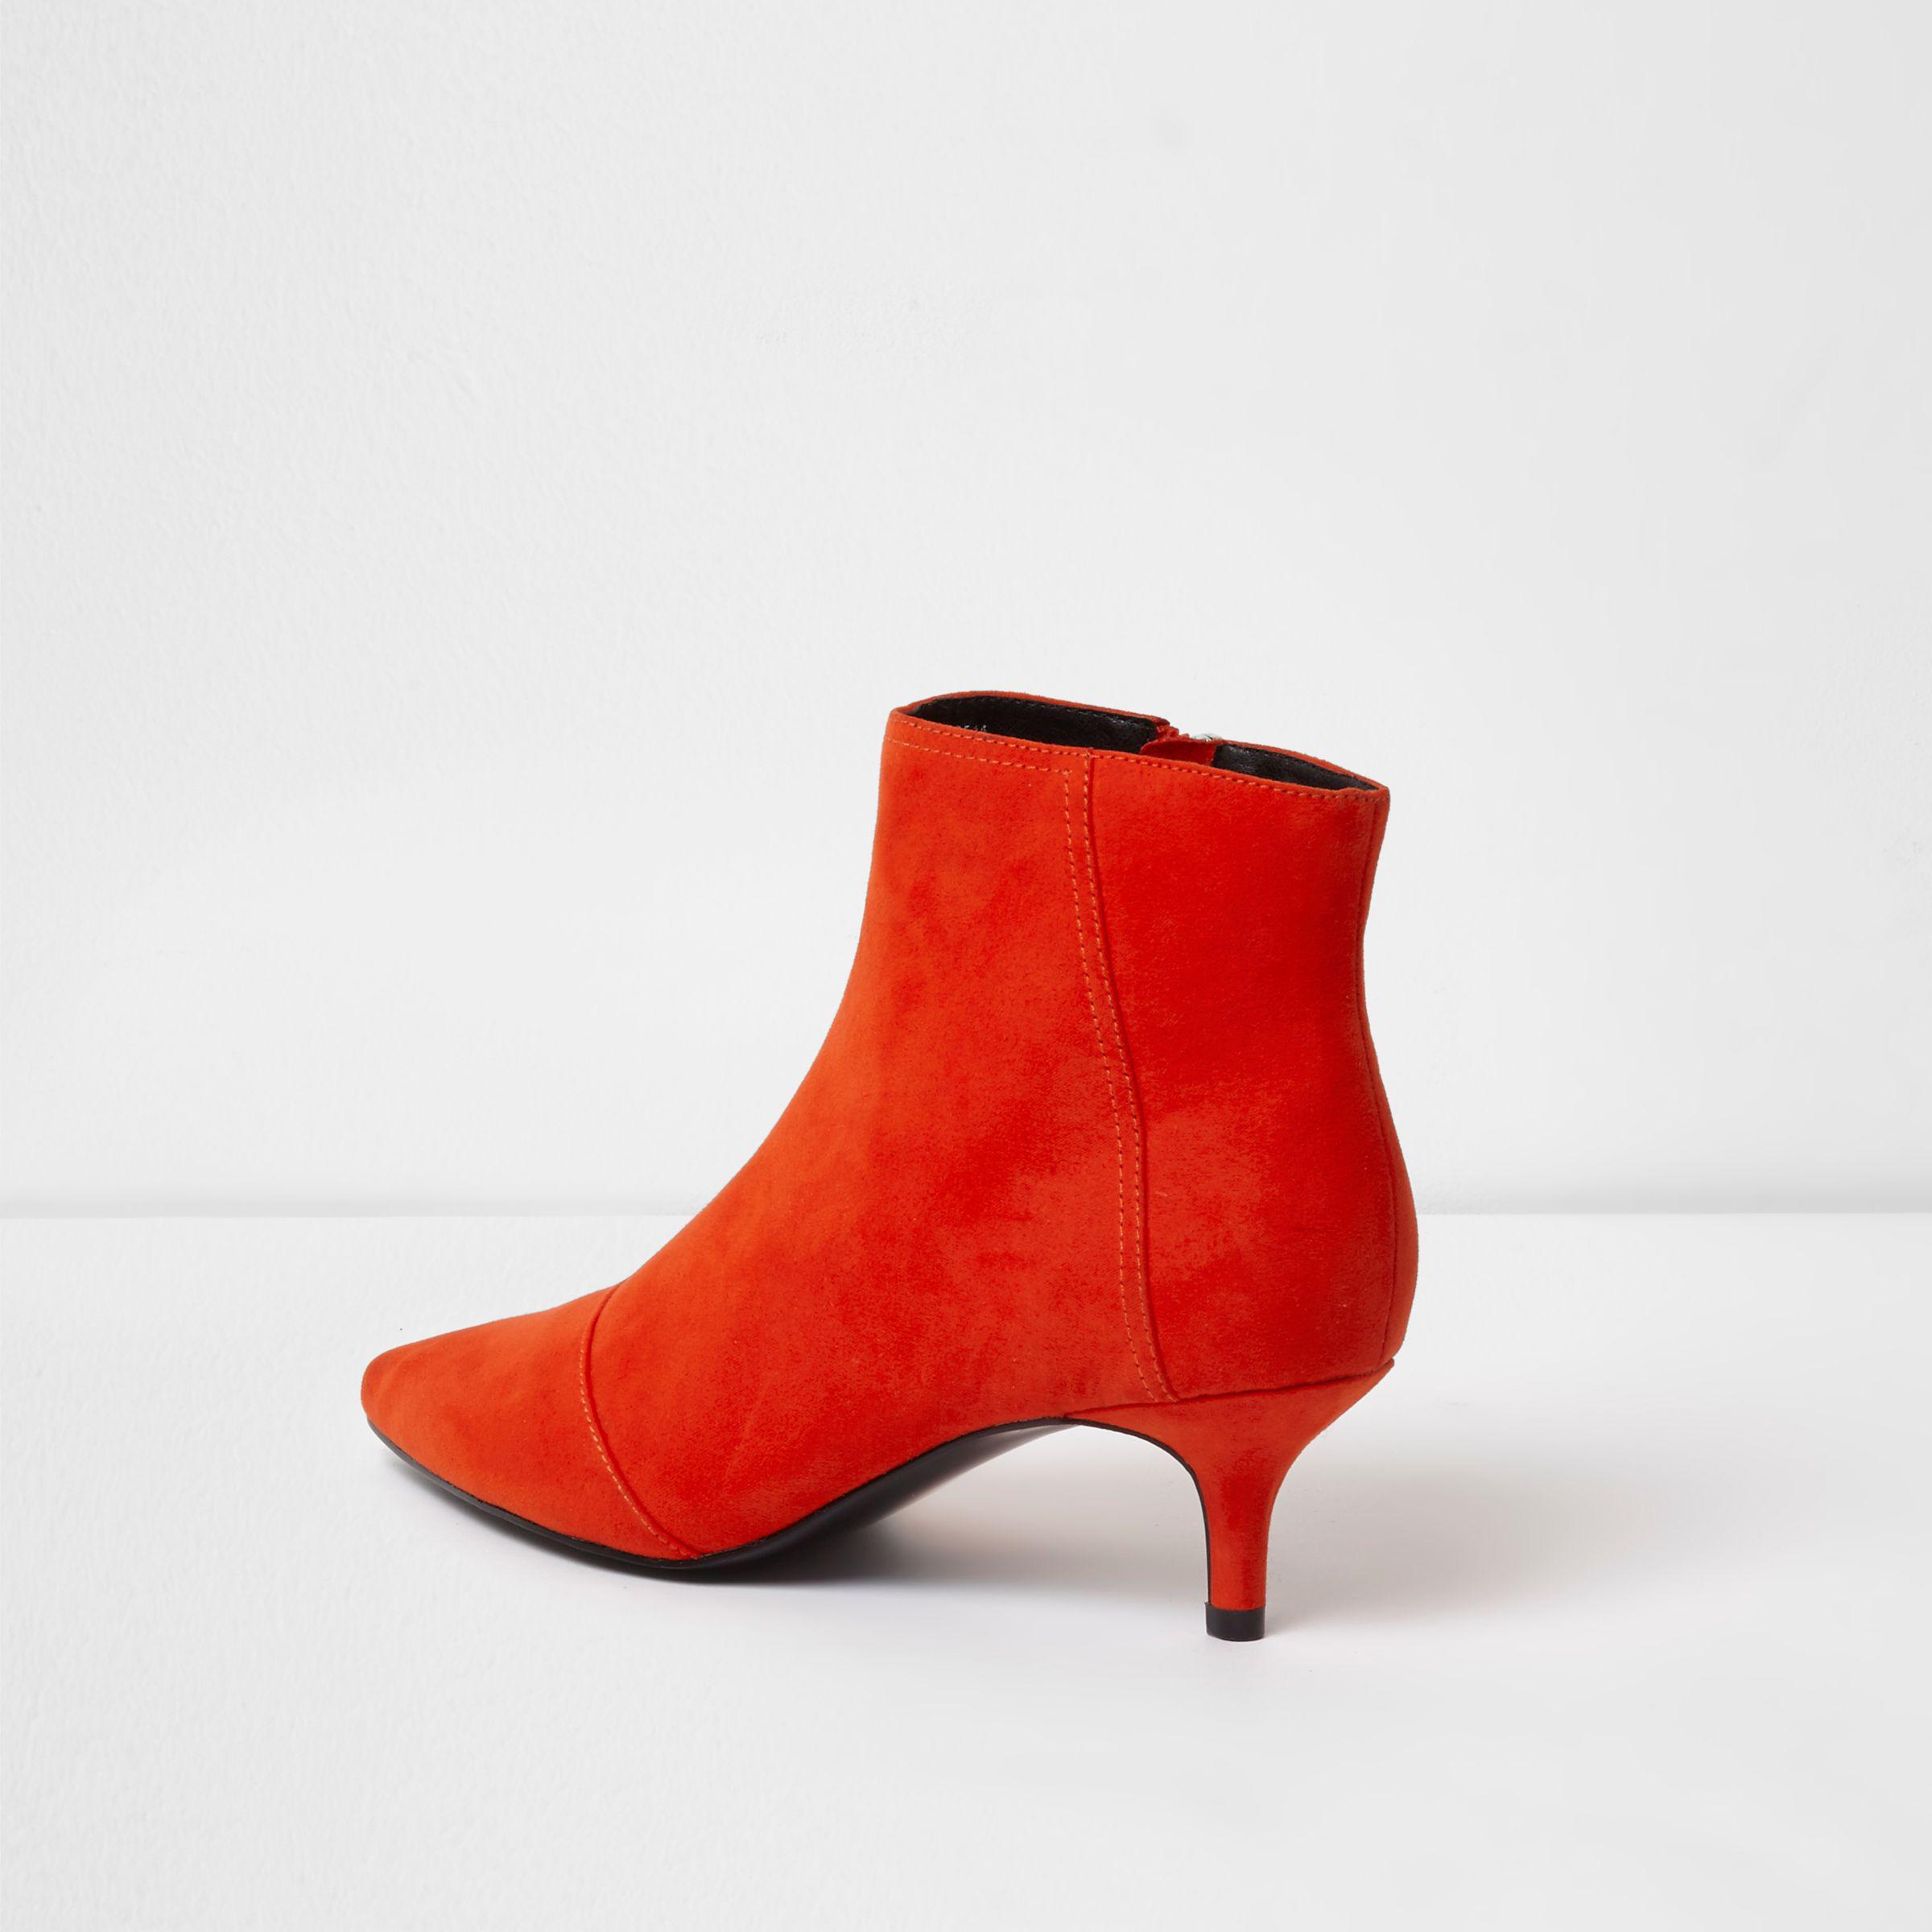 River Island Suede Red Pointed Kitten Heel Ankle Boots - Lyst